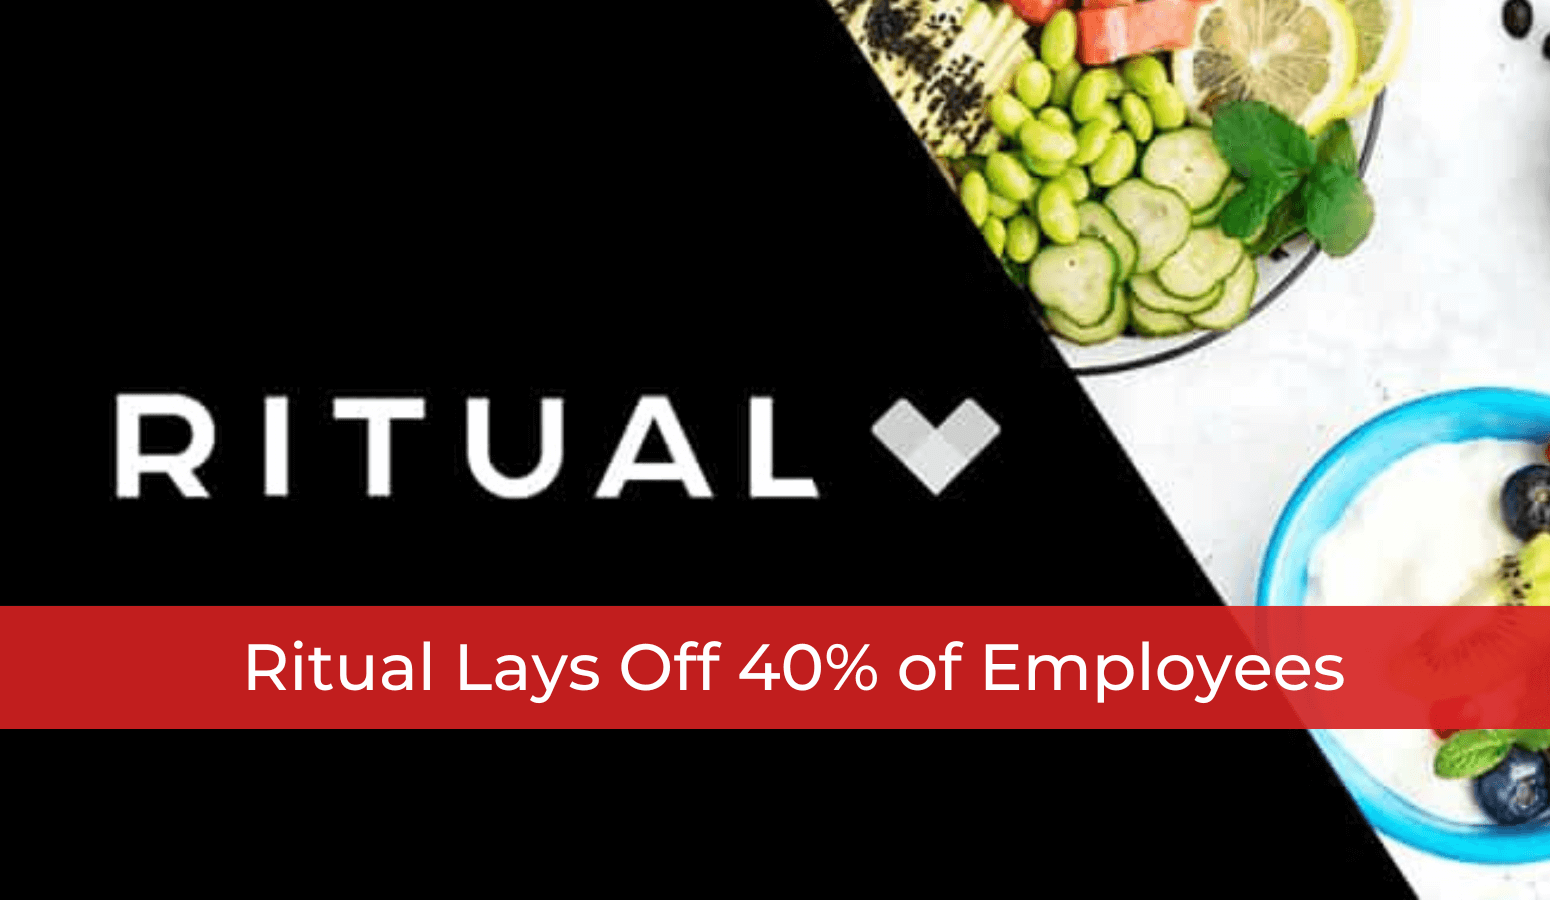 Featured image for “Ritual Lays Off 40% of Employees”